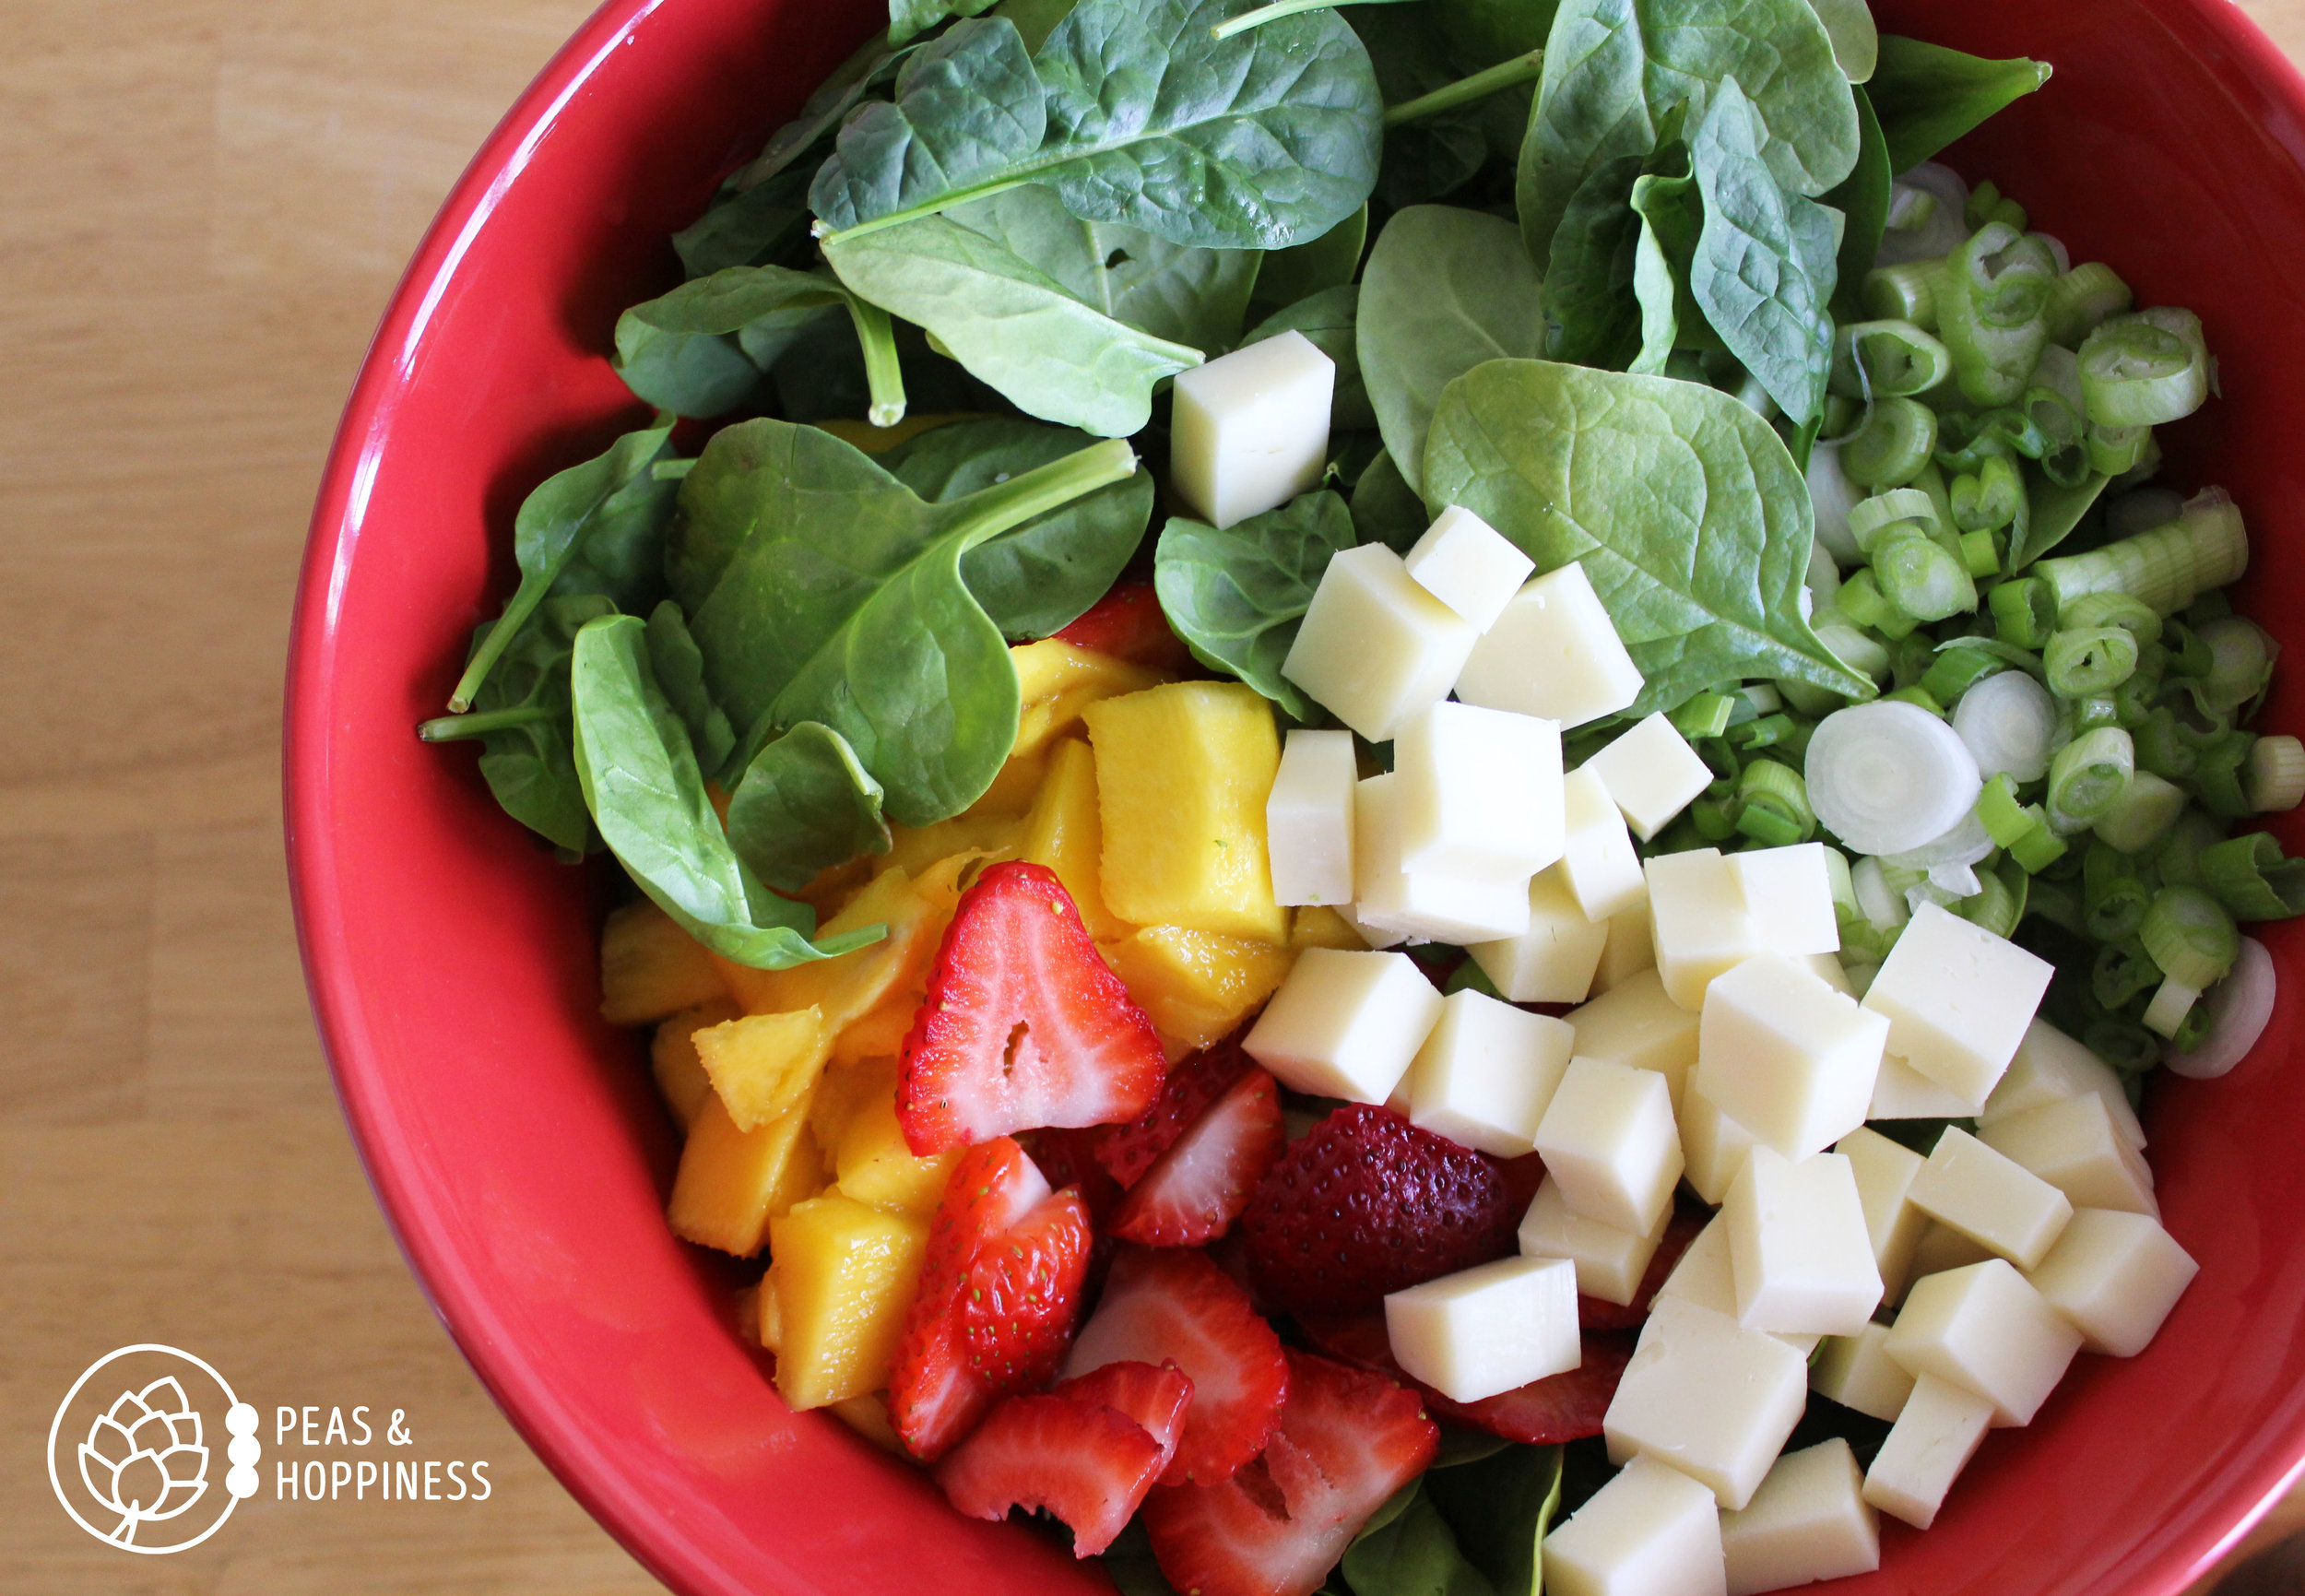 What about a vegetarian diet that includes fruits and vegetables? Is the sugar in fruit okay? Strawberry Mango Spinach Salad